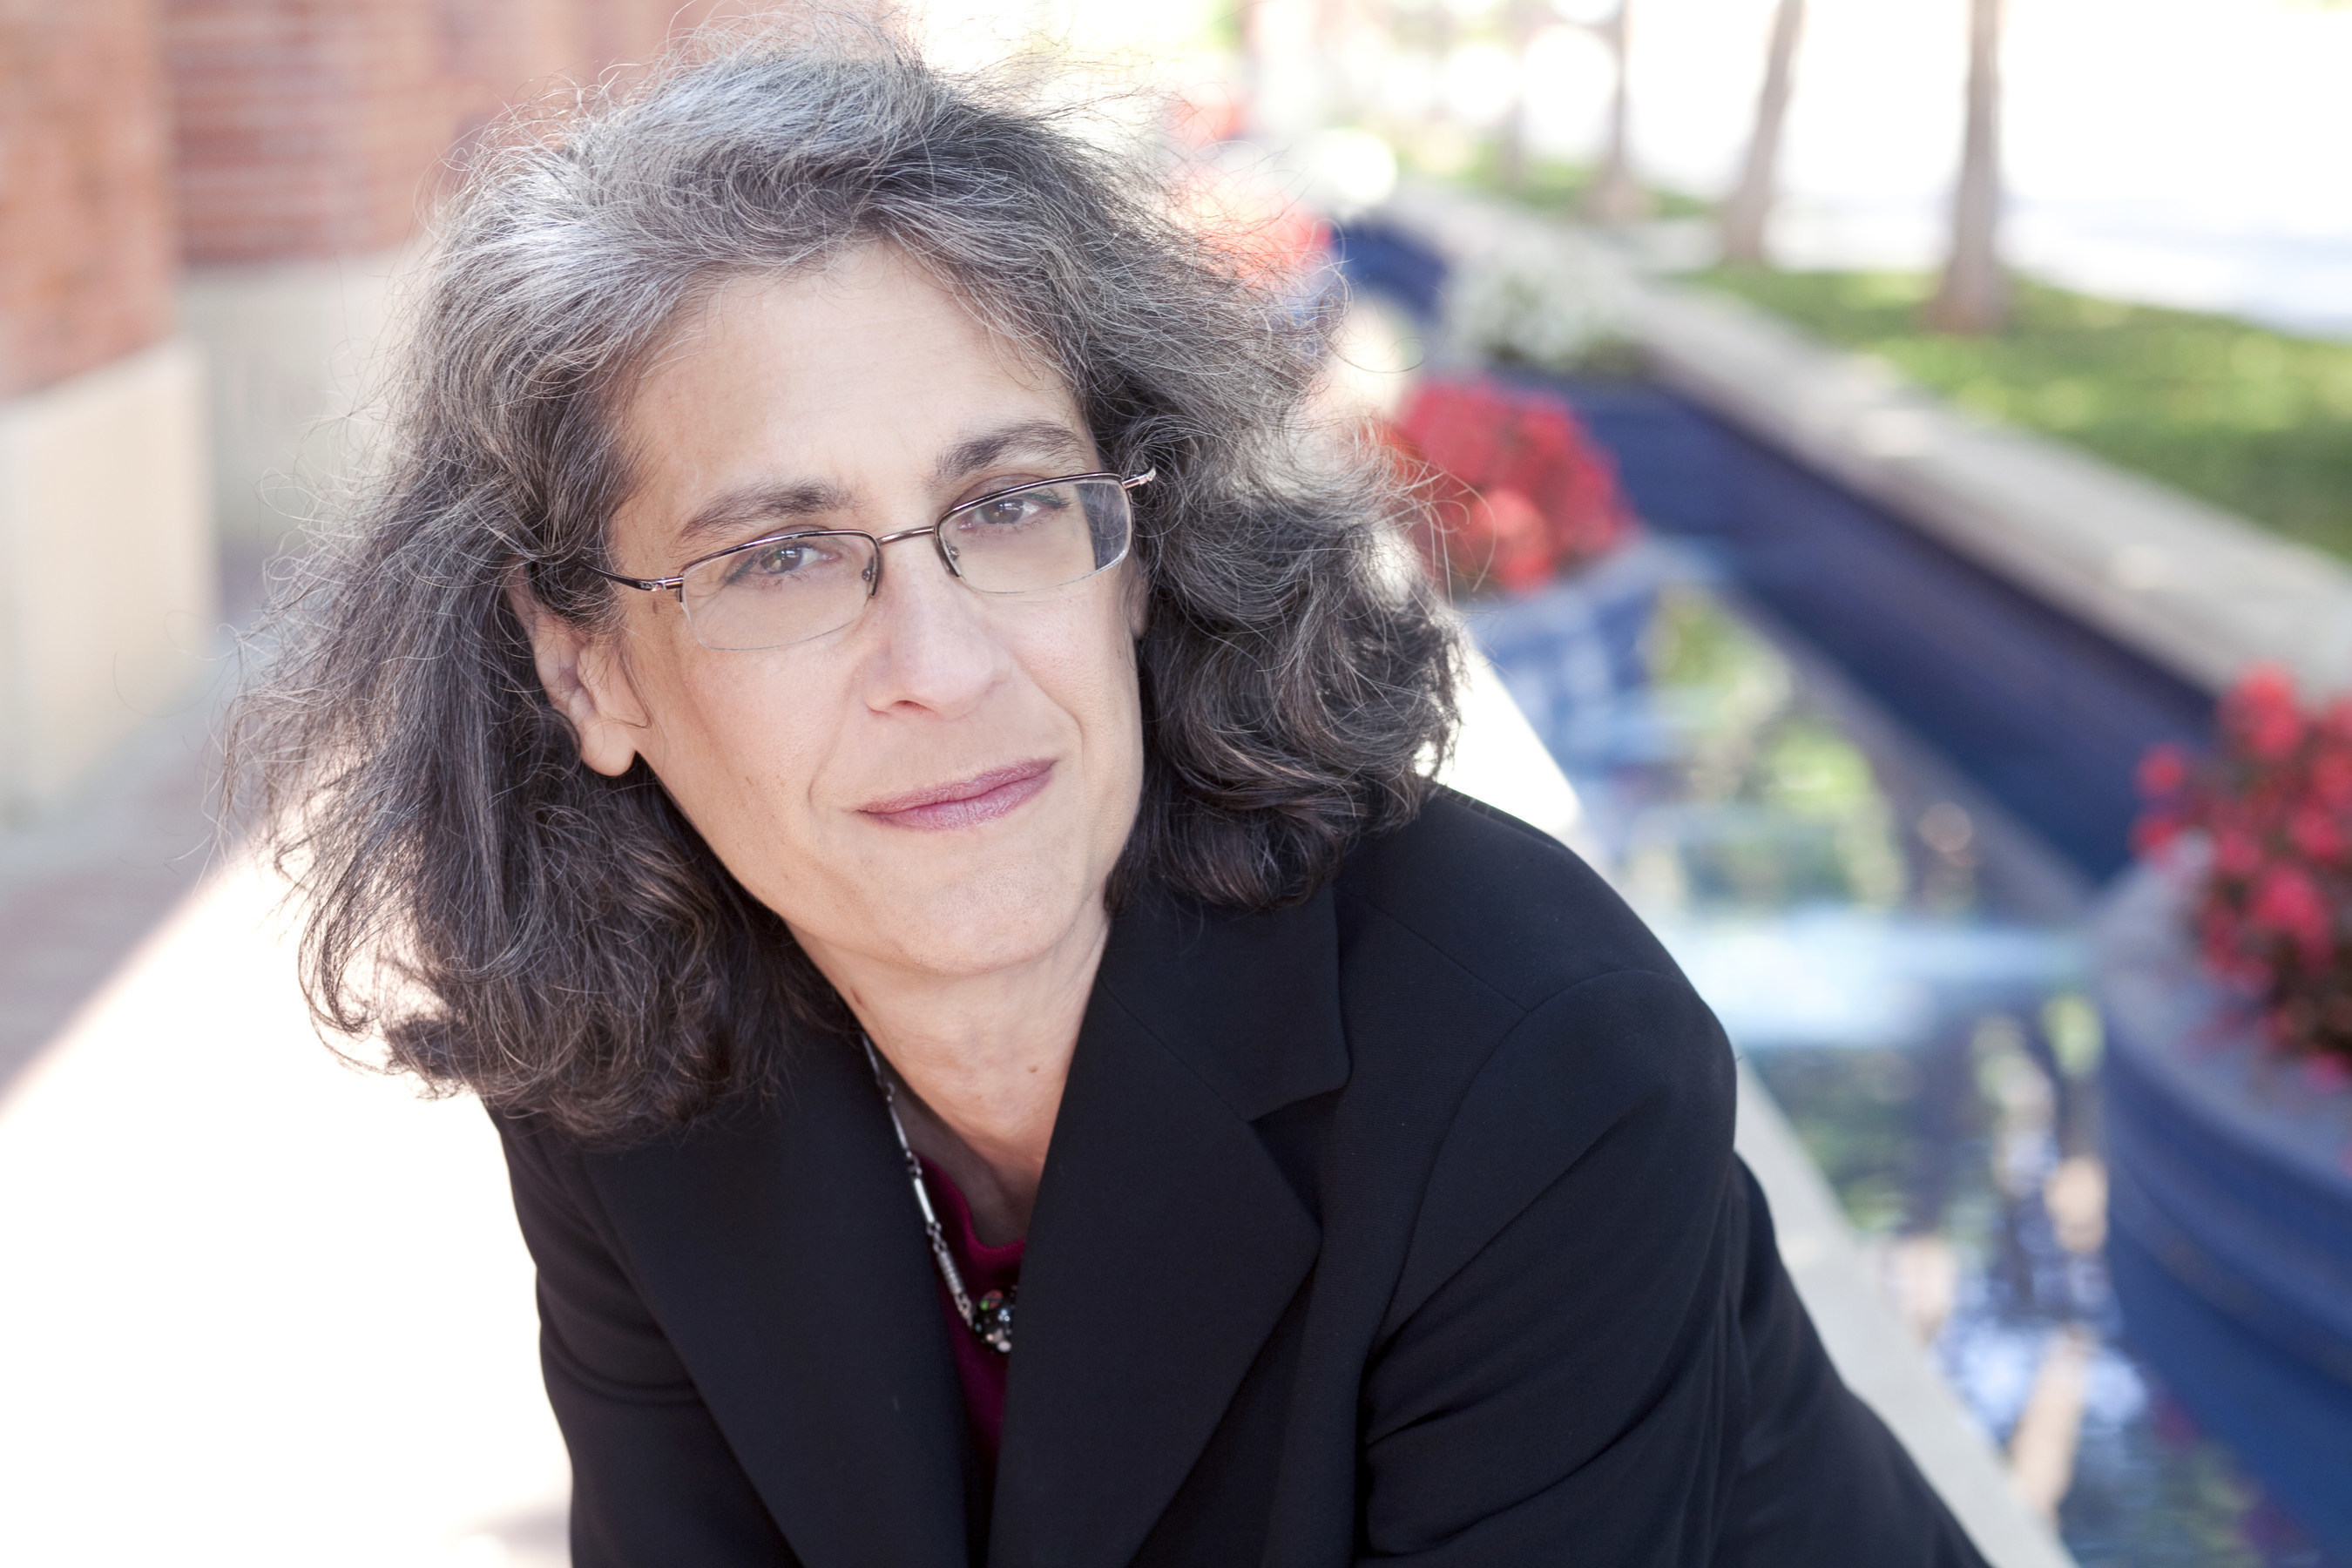 Elyn Saks, USC law professor and MacArthur "Genius Award" recipient, has battled schizophrenia for decades. She directs The Saks Institute for Mental Health Law, Policy and Ethics at USC Gould School of Law in Los Angeles.